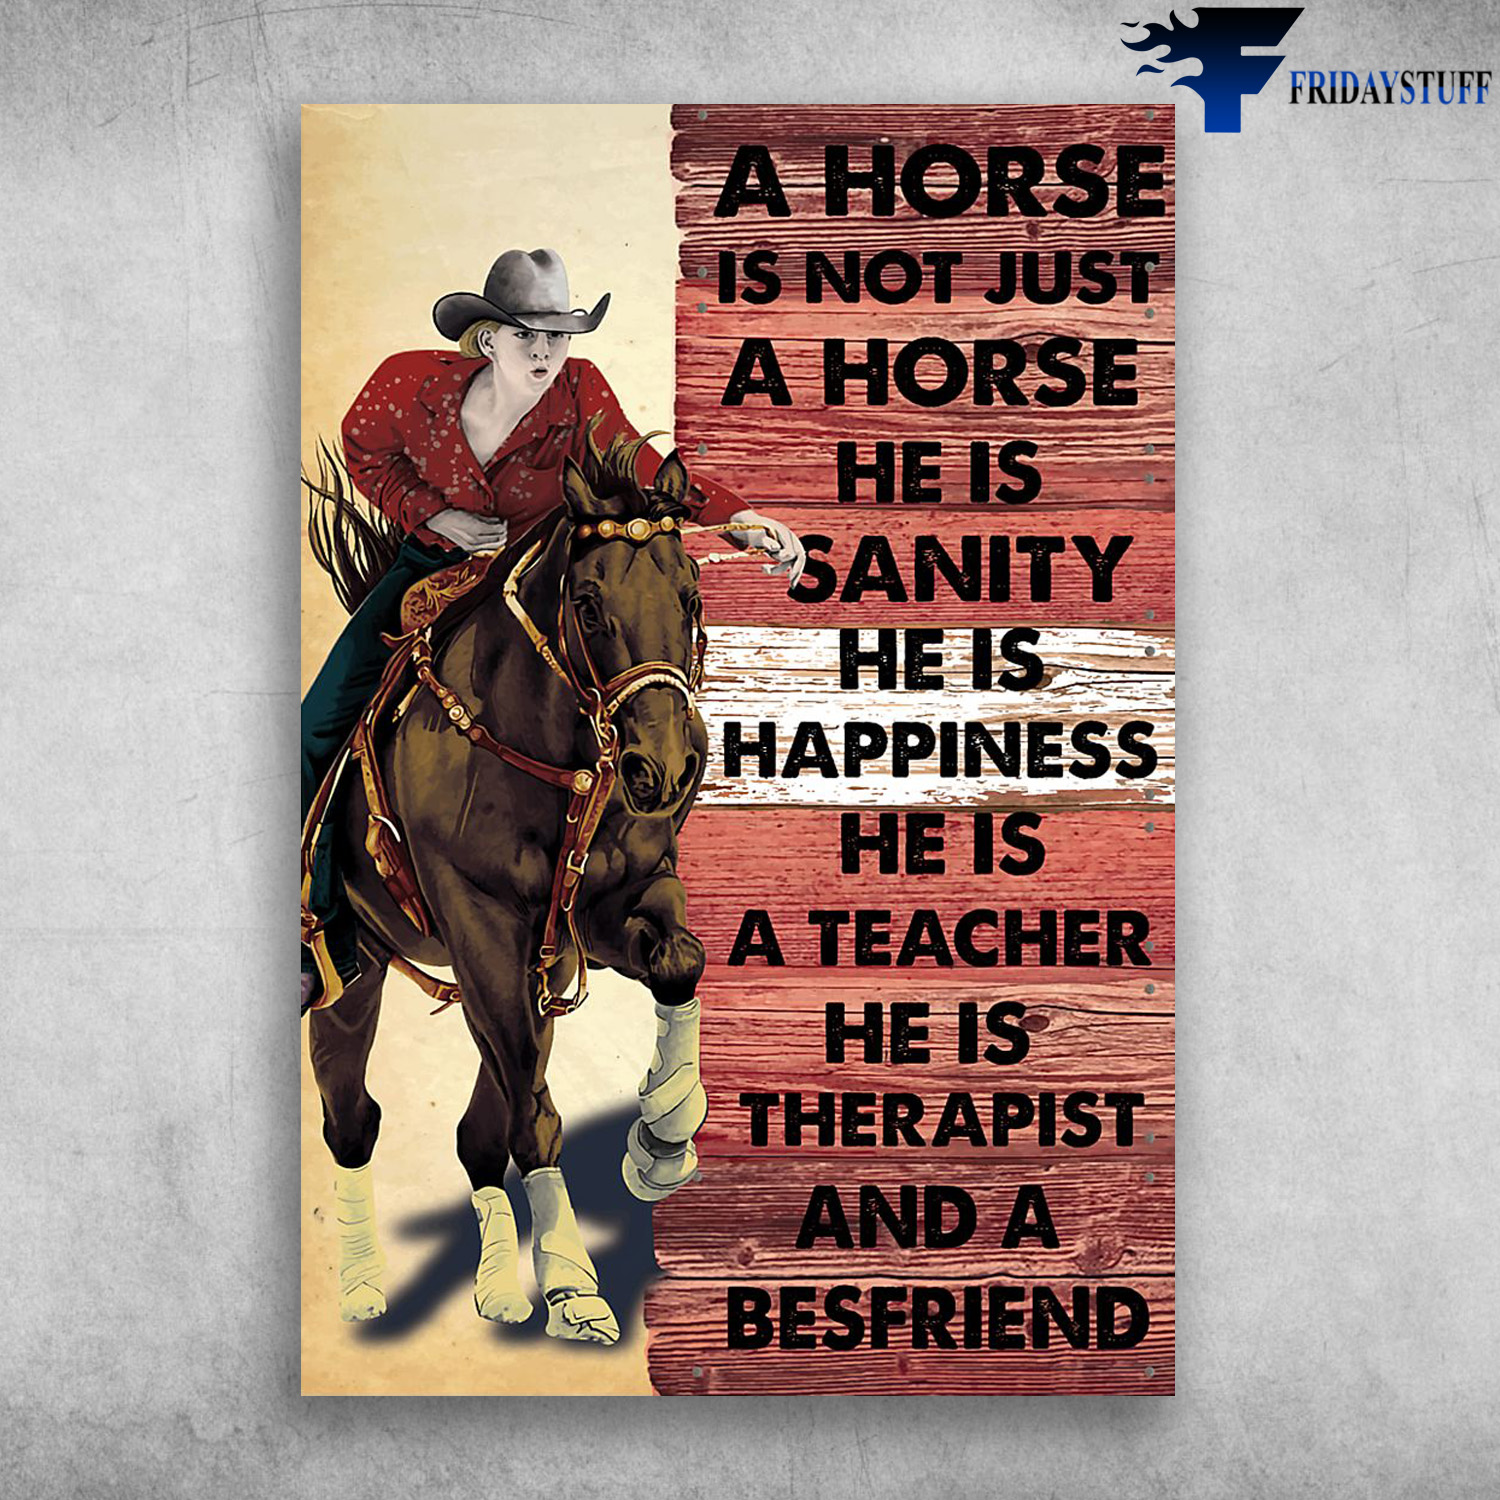 Cowgirl Riding The Horse - A Horse Is Not Just A Horse, He Is Sanity, He Is Happiness, He Is A Teacher, He Is Therapist, And A Bestfriend